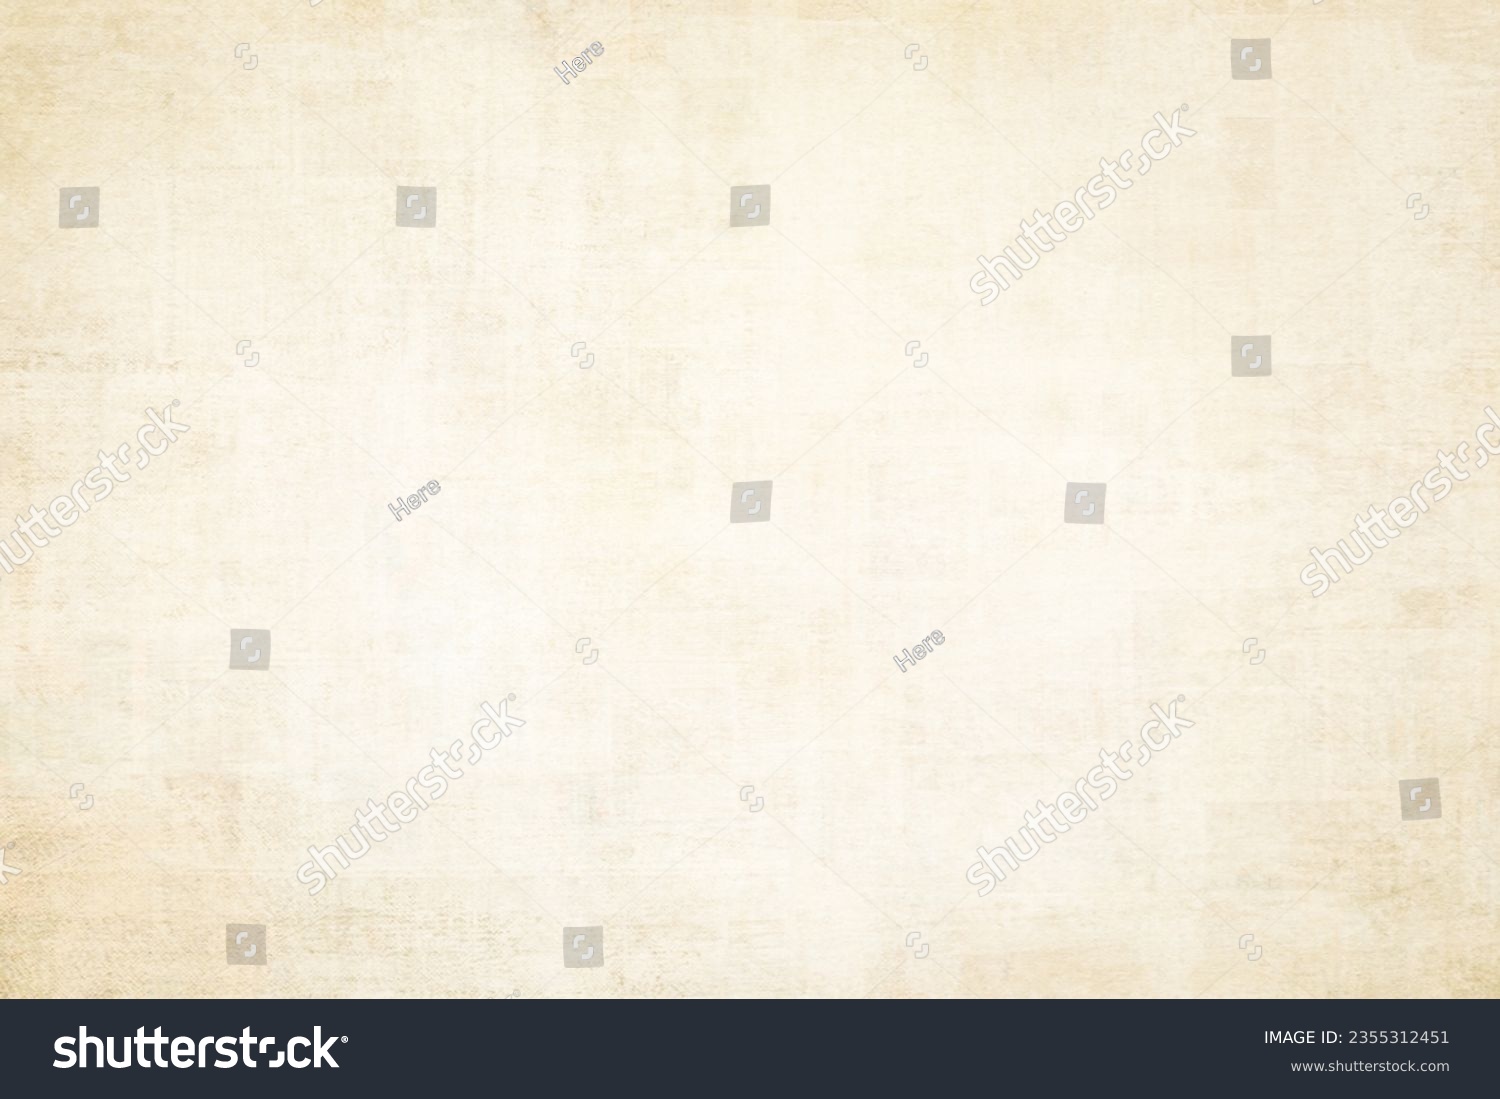 OLD PAPER TEXTURE, BLANK NEWSPAPER PATTERN WITH TEXTURED SPACE FOR TEXT  #2355312451